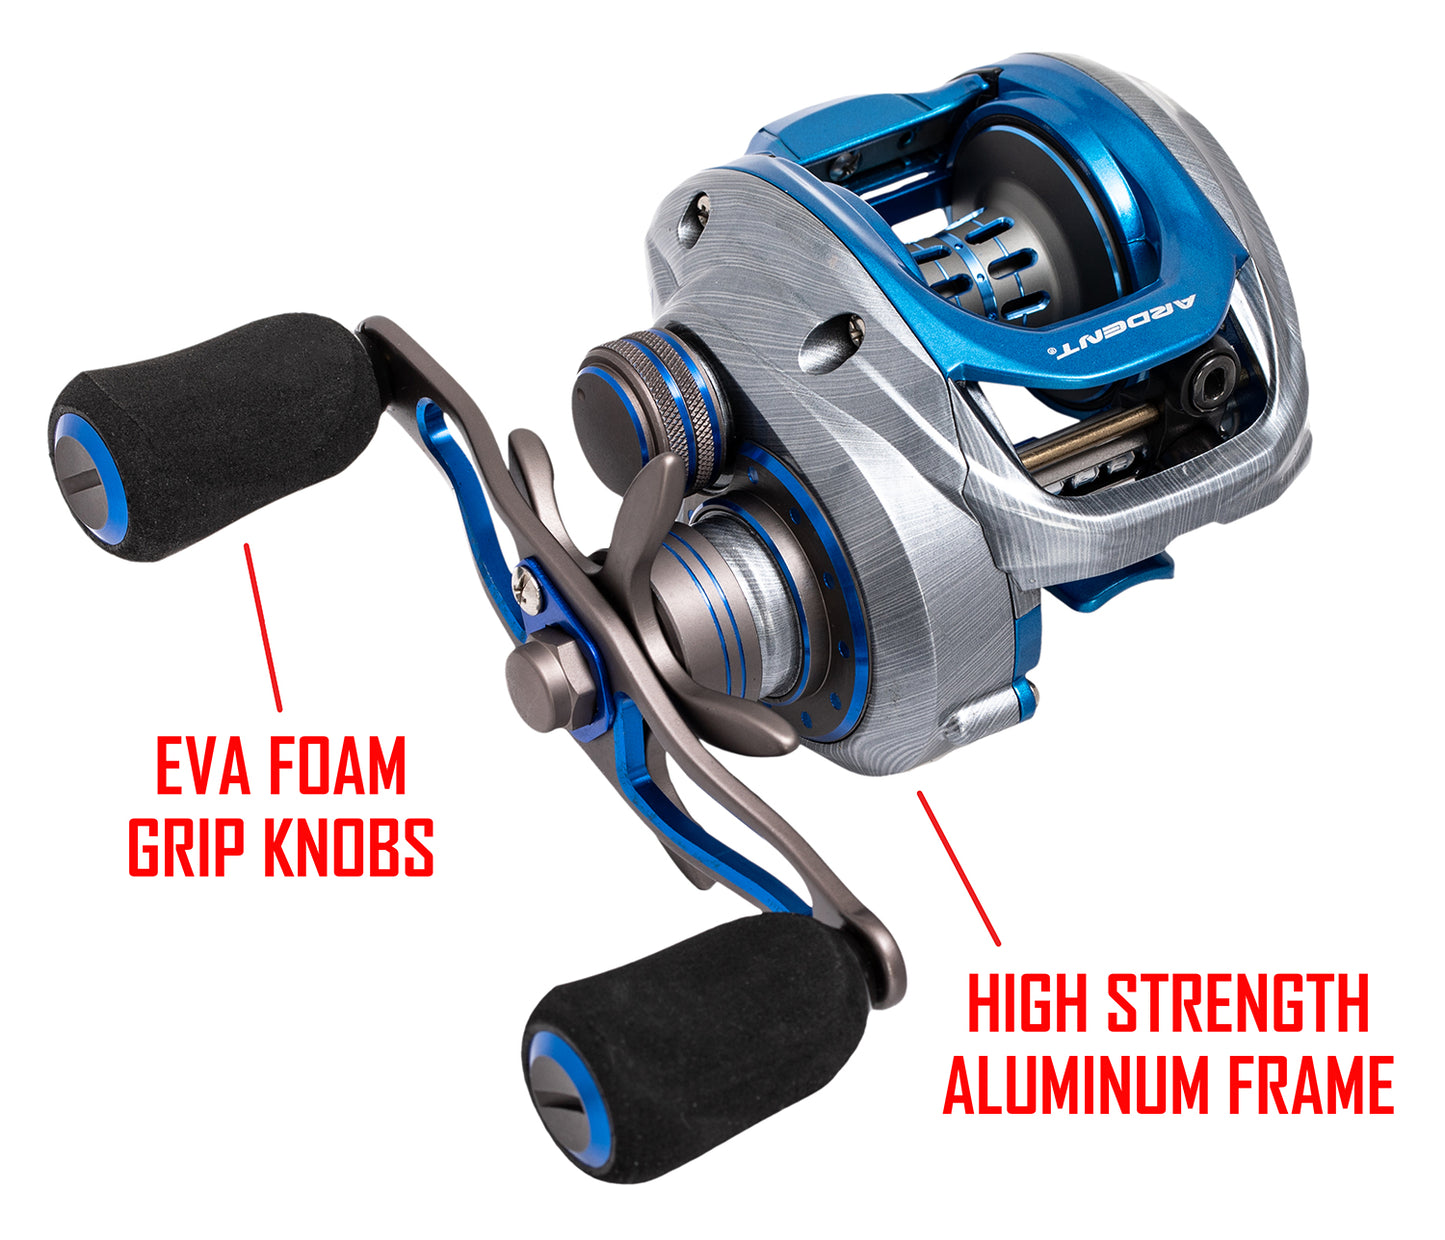 Silver and blue SUMMIT HAWK Baitcaster with red text. text: EVA FOAM GRIP KNOBS HIGH STRENGTH ALUMINUM FRAME